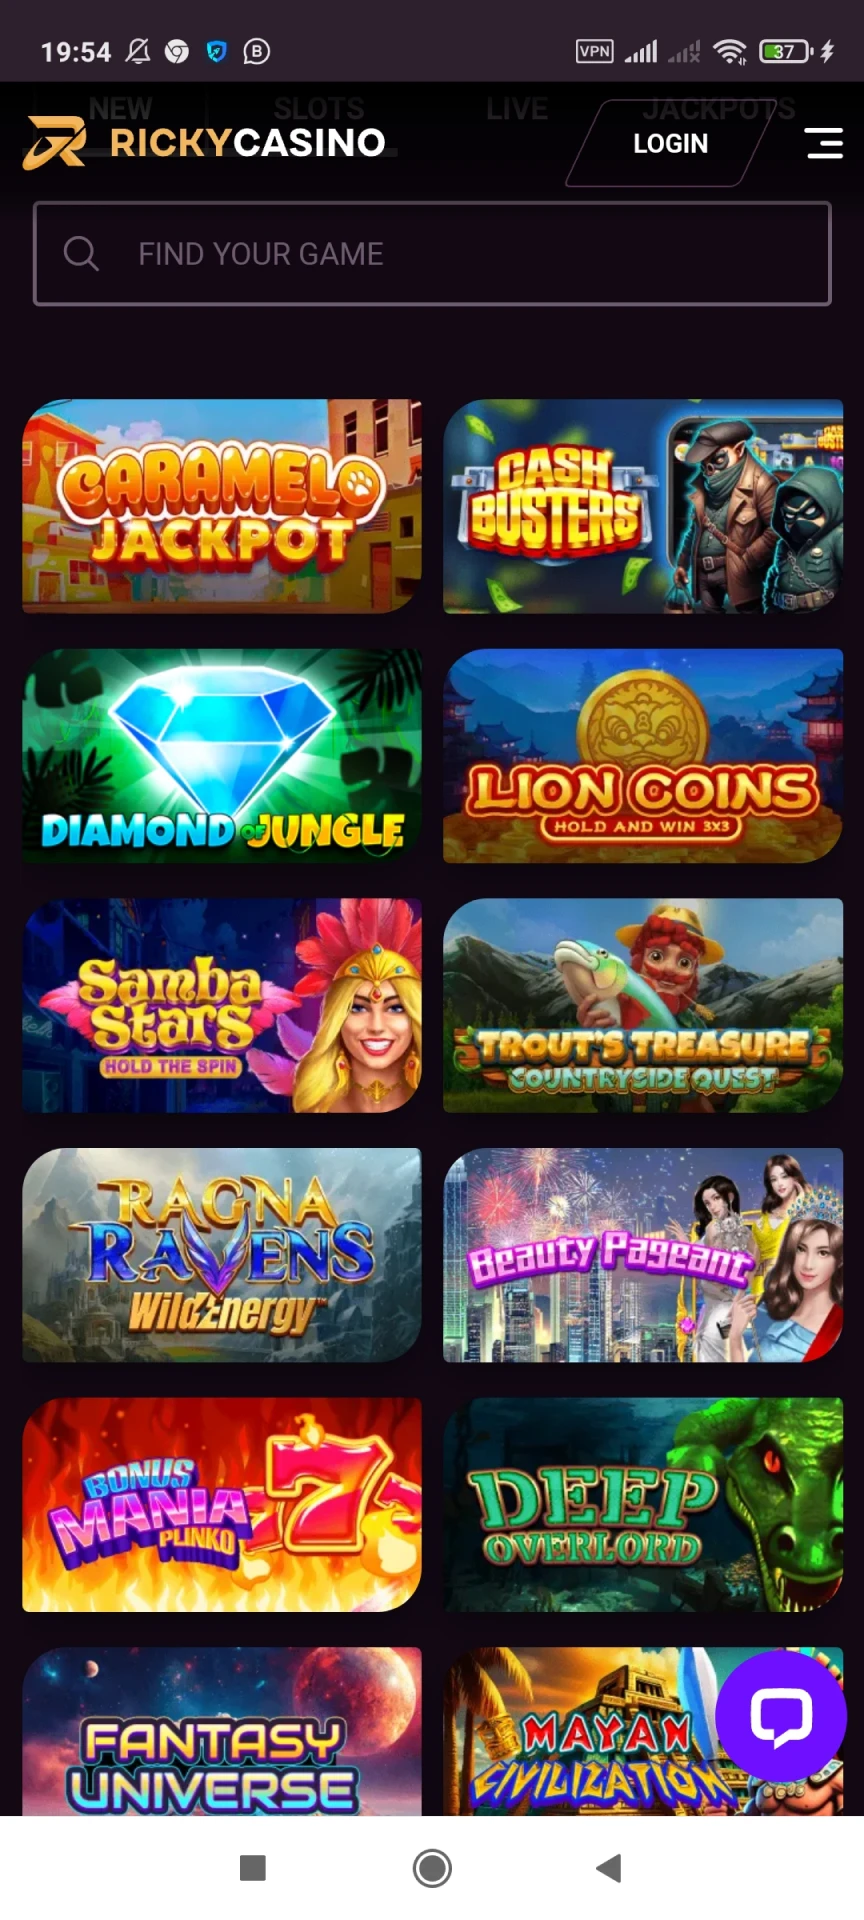 Visit the games page of the Ricky Casino app.